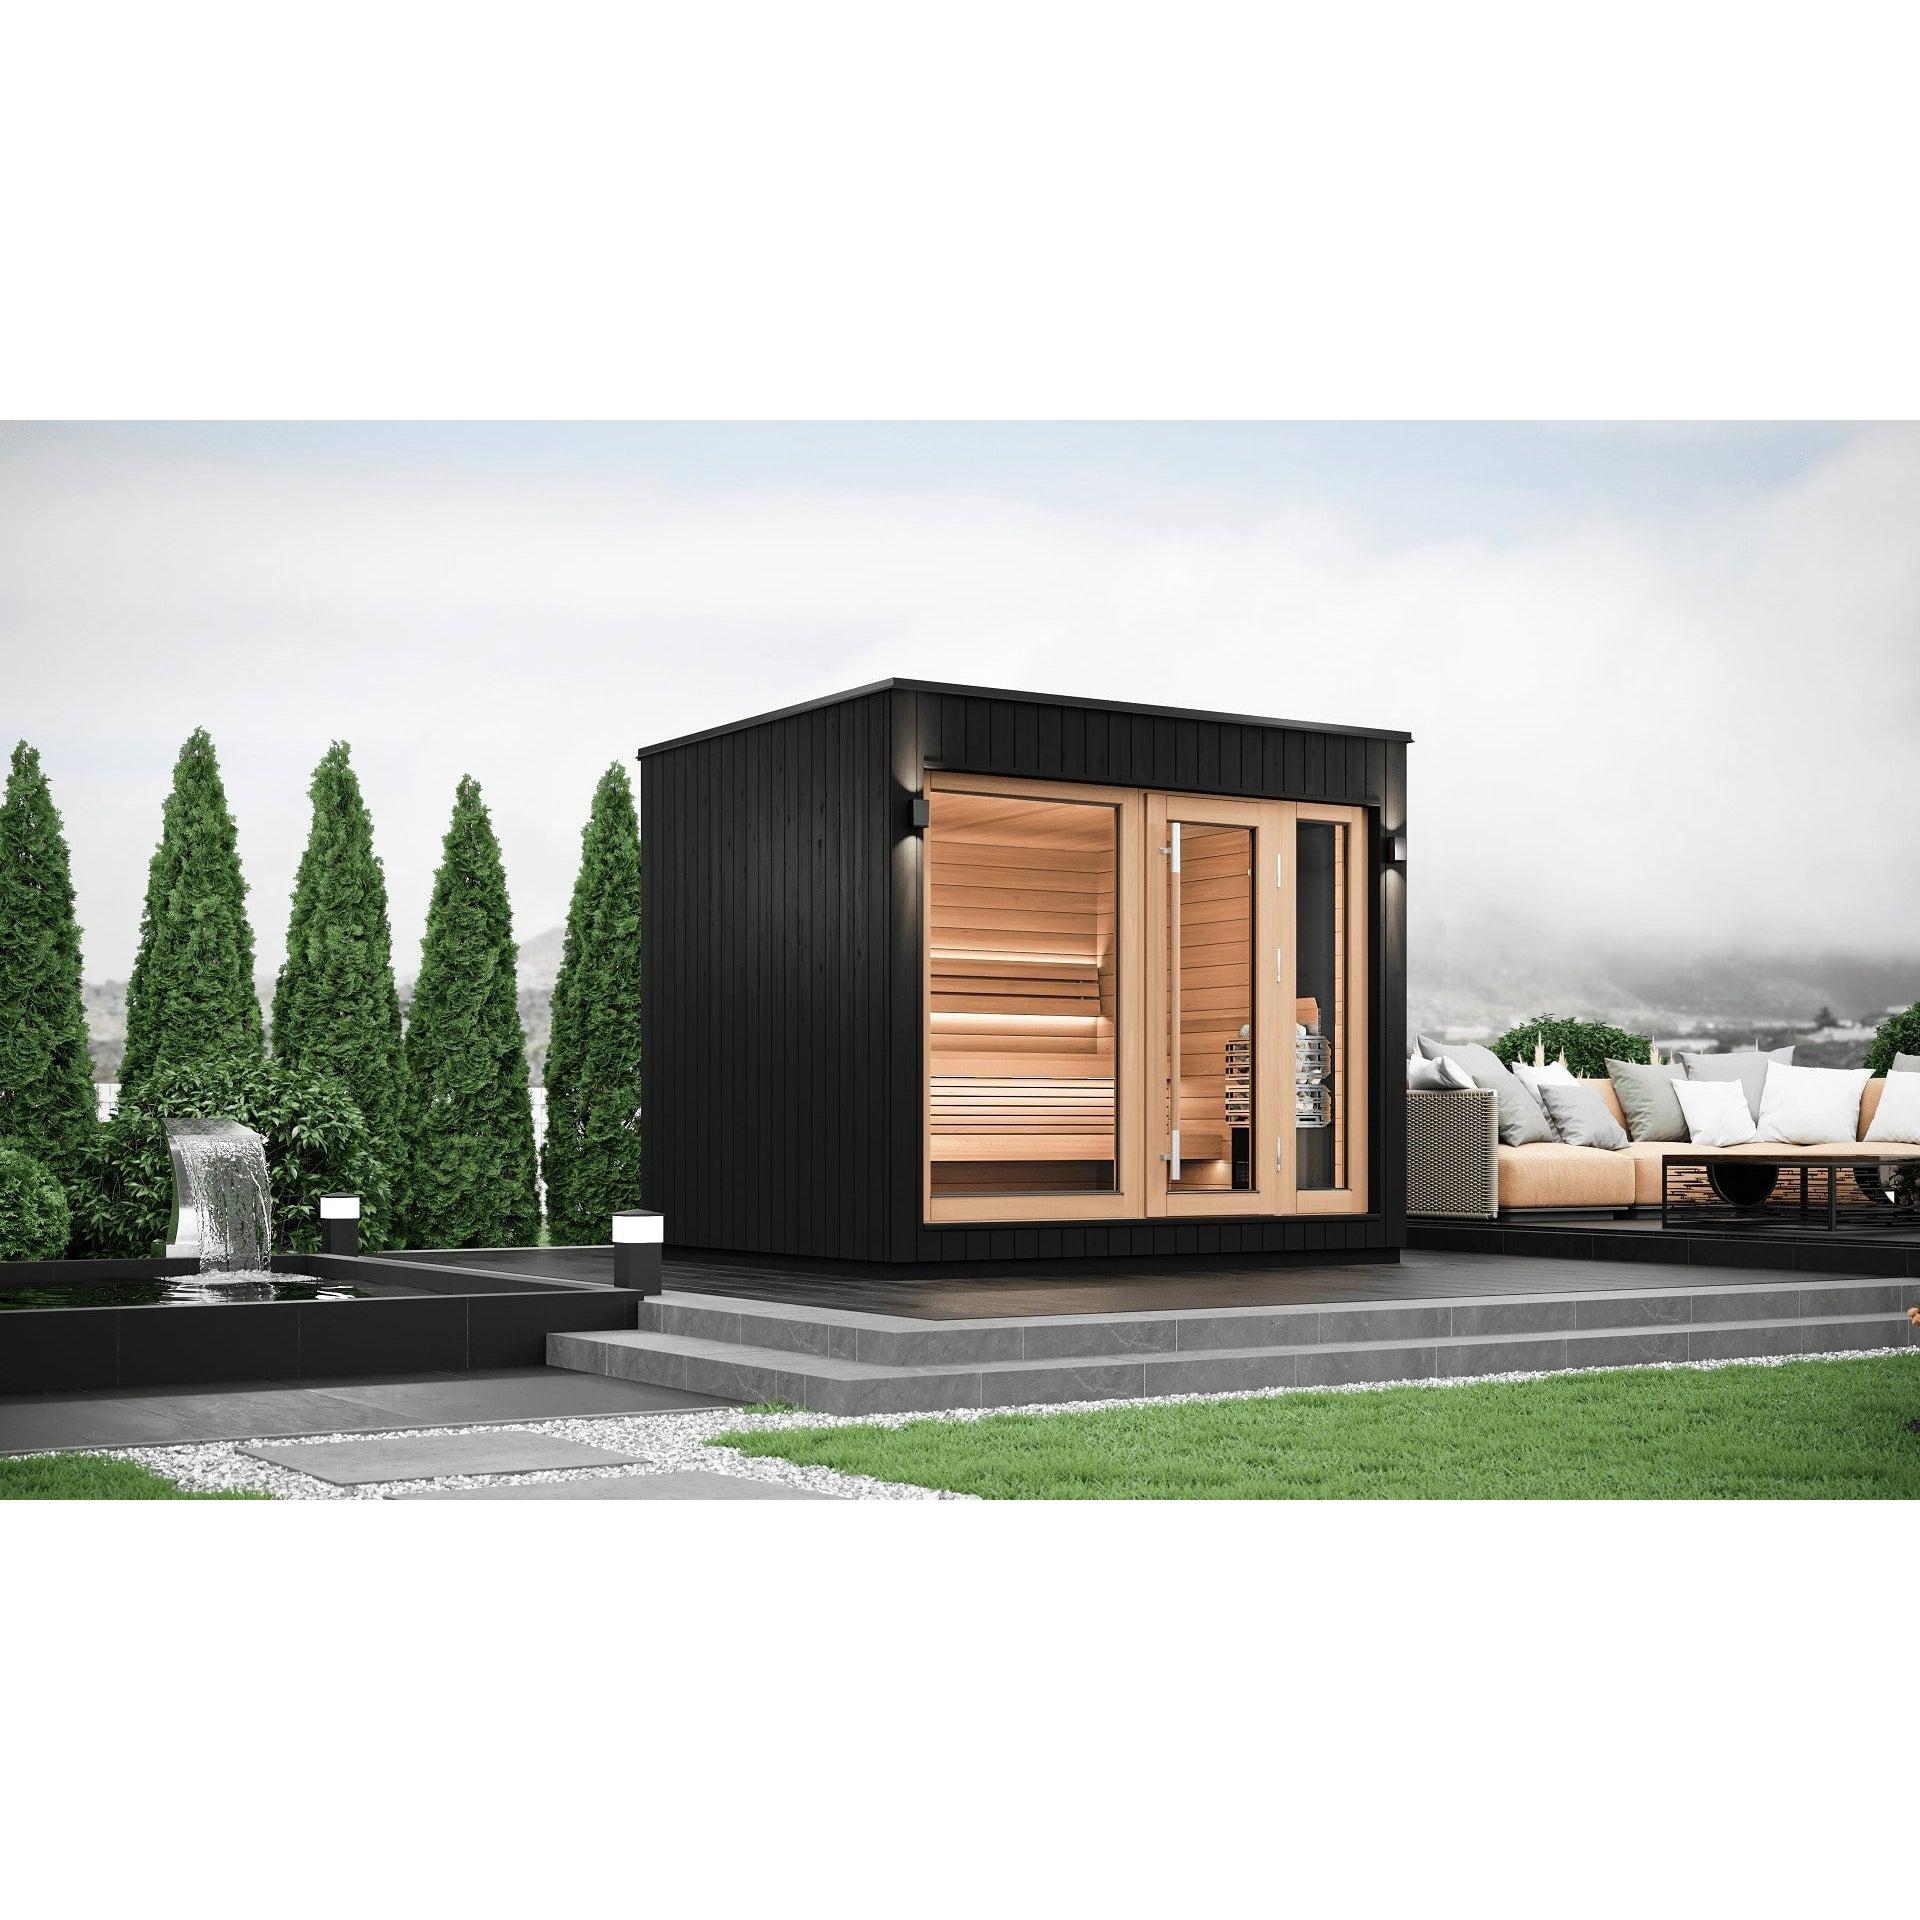 SaunaLife Model G7 Pre-Assembled Outdoor Home Sauna - Right Swing Door - Purely Relaxation